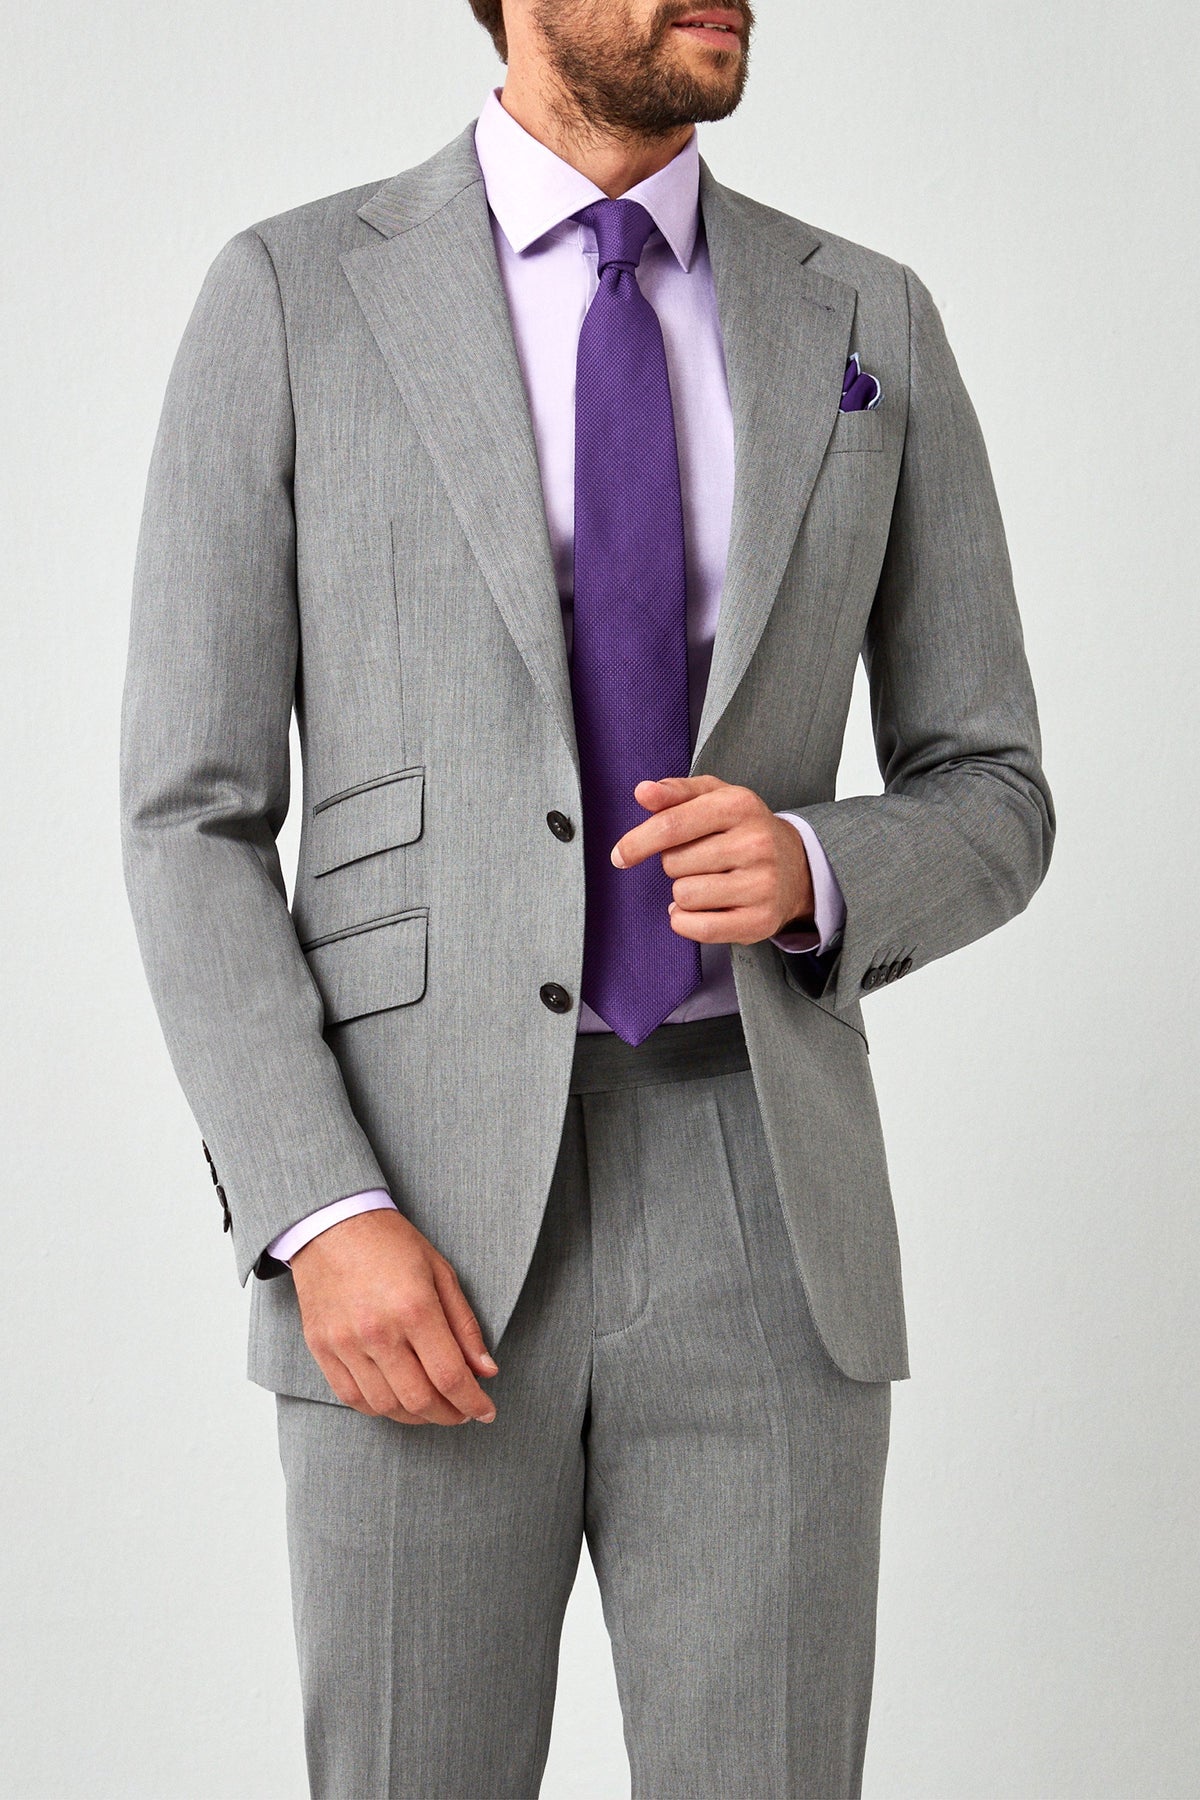 Fiance Wants to Wear a PURPLE Suit! Help me, Lord - Weddingbee-Boards | Purple  suits, Well dressed men, Mens outfits